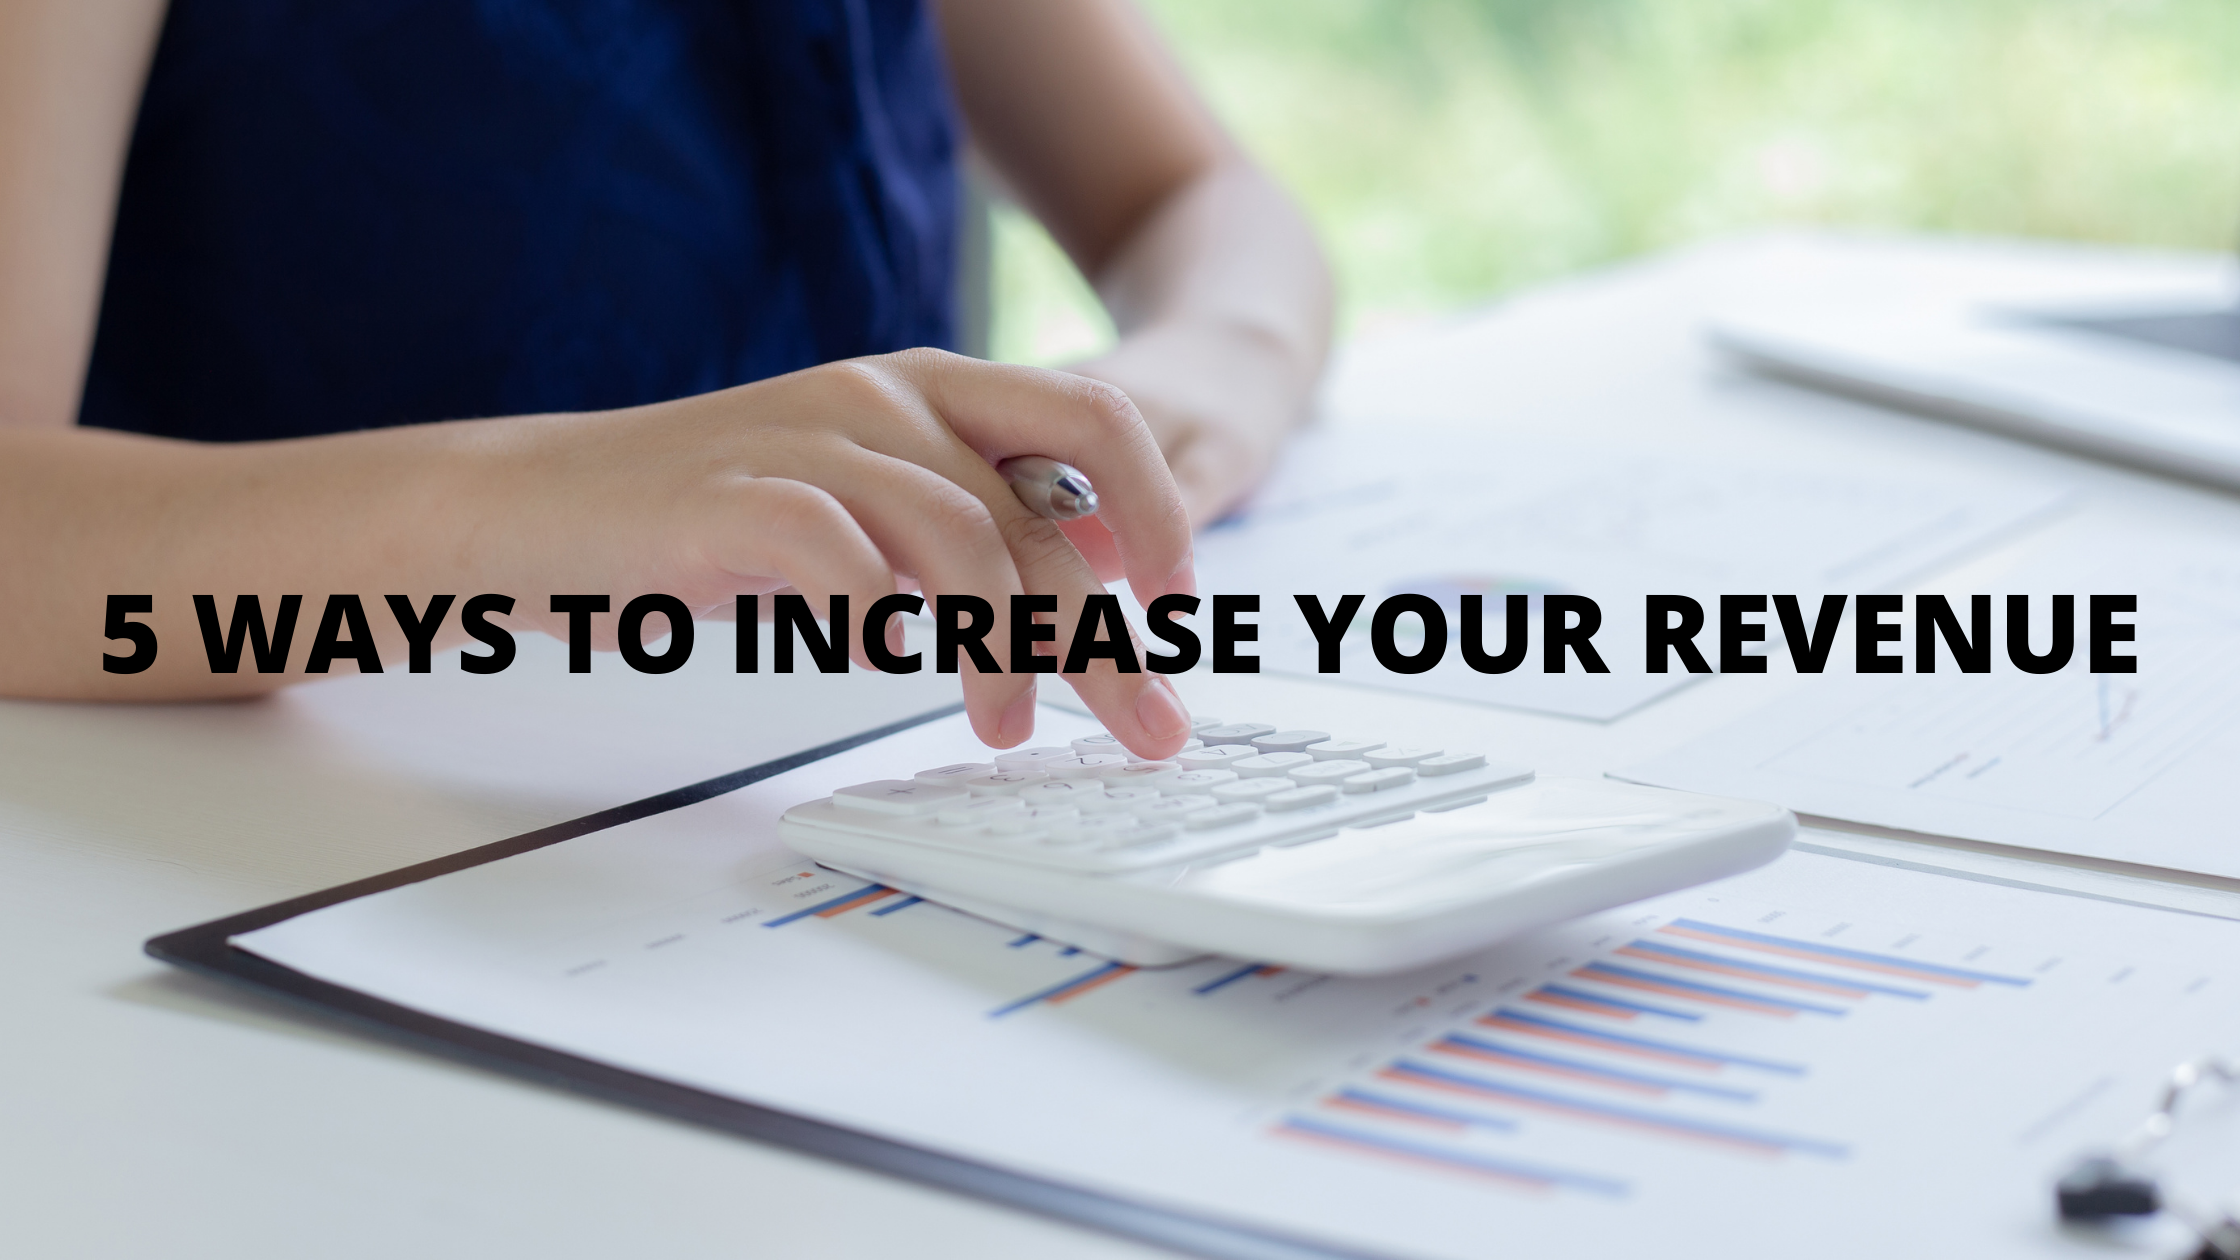 Top 5 ways to increase your hotel or STR revenue